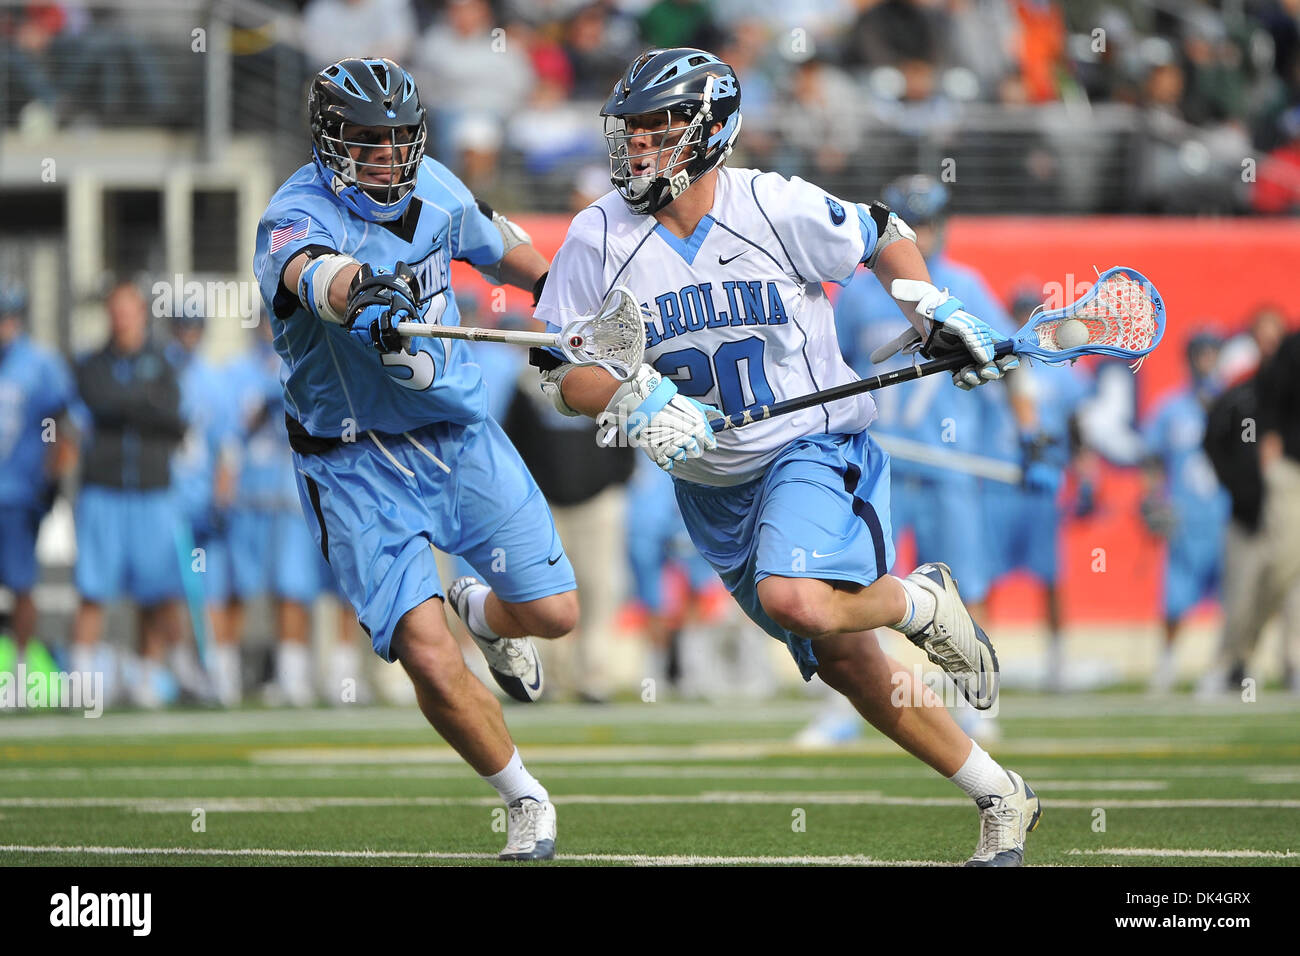 Apr. 3, 2011 - East Rutherford, New Jersey, U.S - Johns Hopkins Blue Jays Goalkeeper Guy Van (37) and UNC Tar Heels Midfielder Jimmy Dunster (20) in action during the Konica Minolta Big City Classic at The New Meadowlands Stadium in East Rutherford New Jersey Johns Hopkins X UNC X to X at the half (Credit Image: © Brooks Von Arx/Southcreek Global/ZUMAPRESS.com) Stock Photo